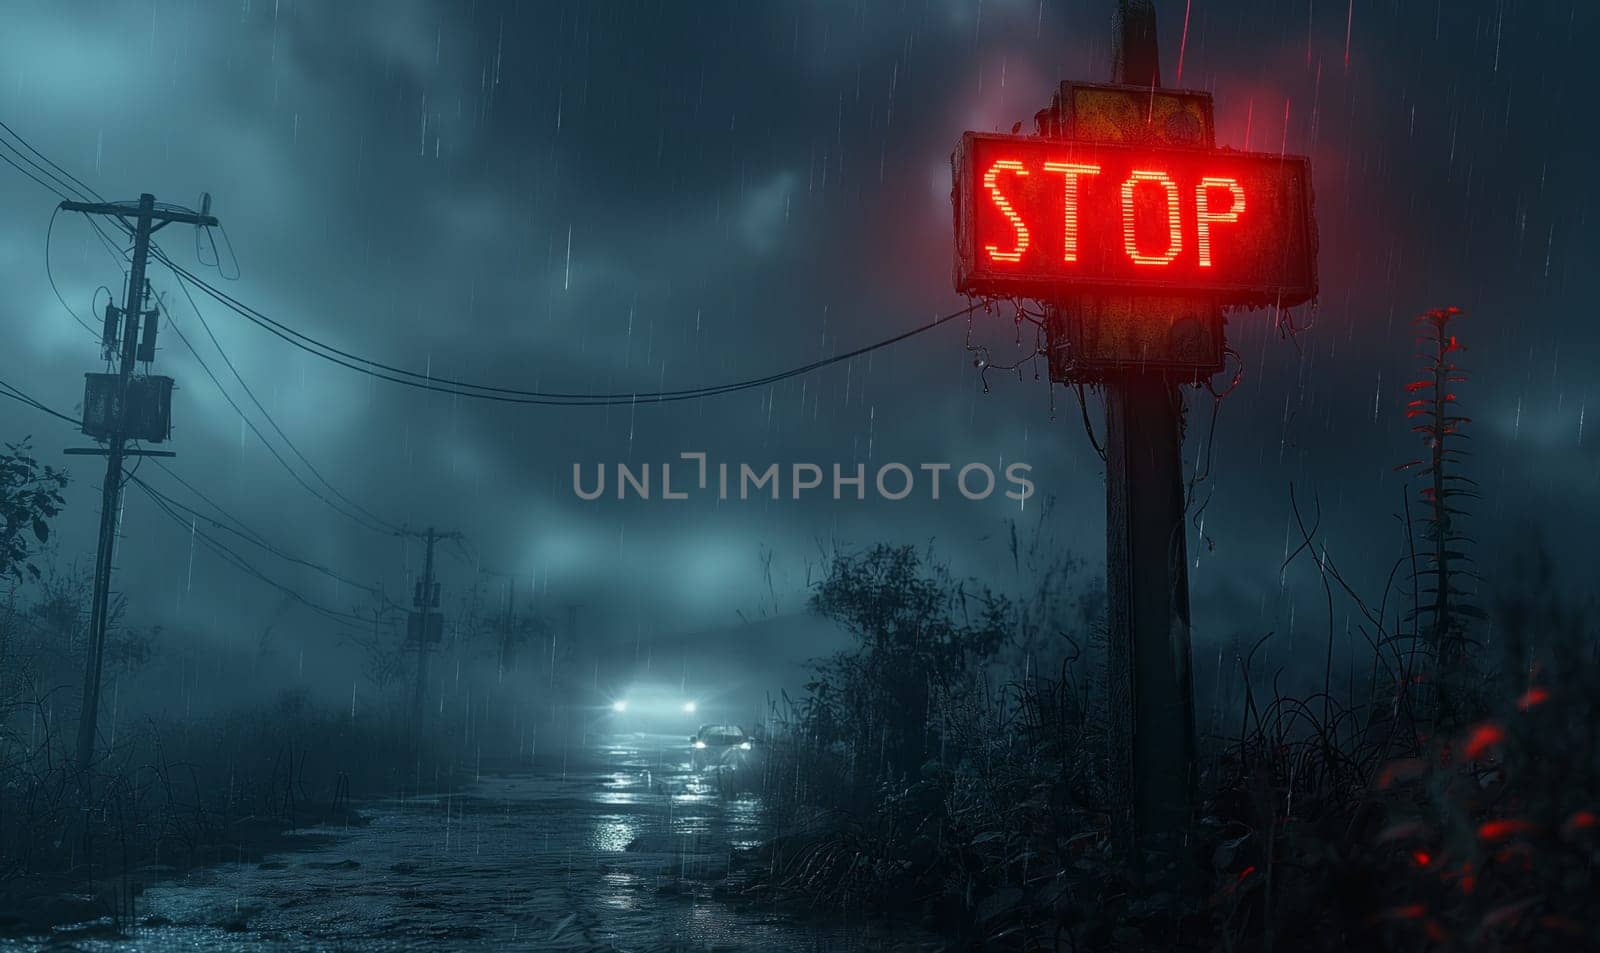 Illuminated Stop Sign at Dusk in the Rain. Selective focus.